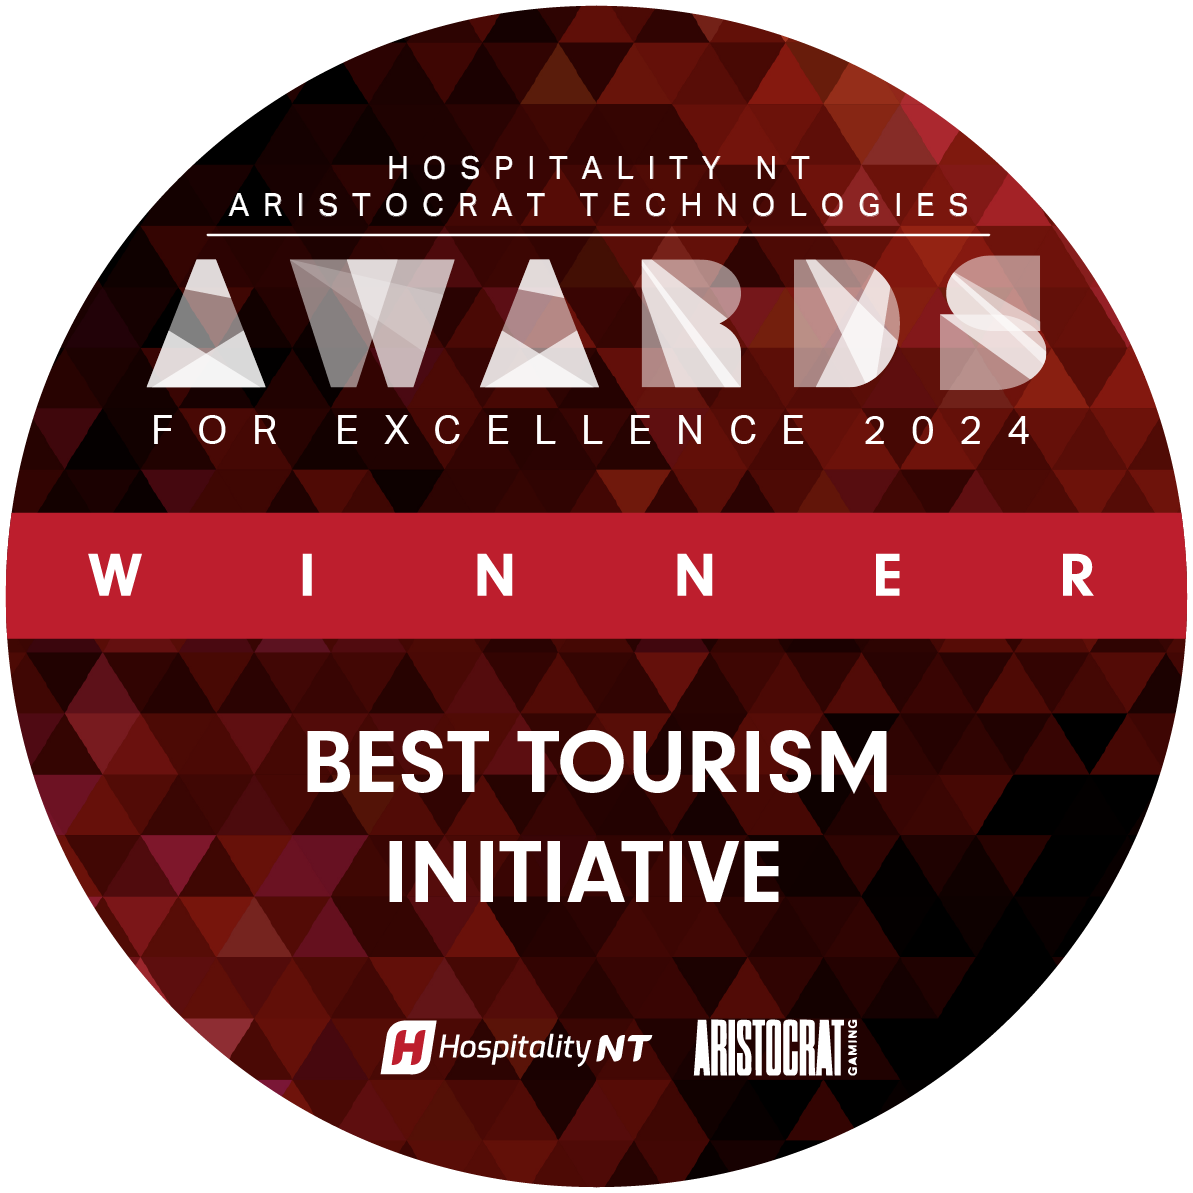 WW has been awarded Best Tourism Initiative Award at the Hospitality NT Awards for Excellence